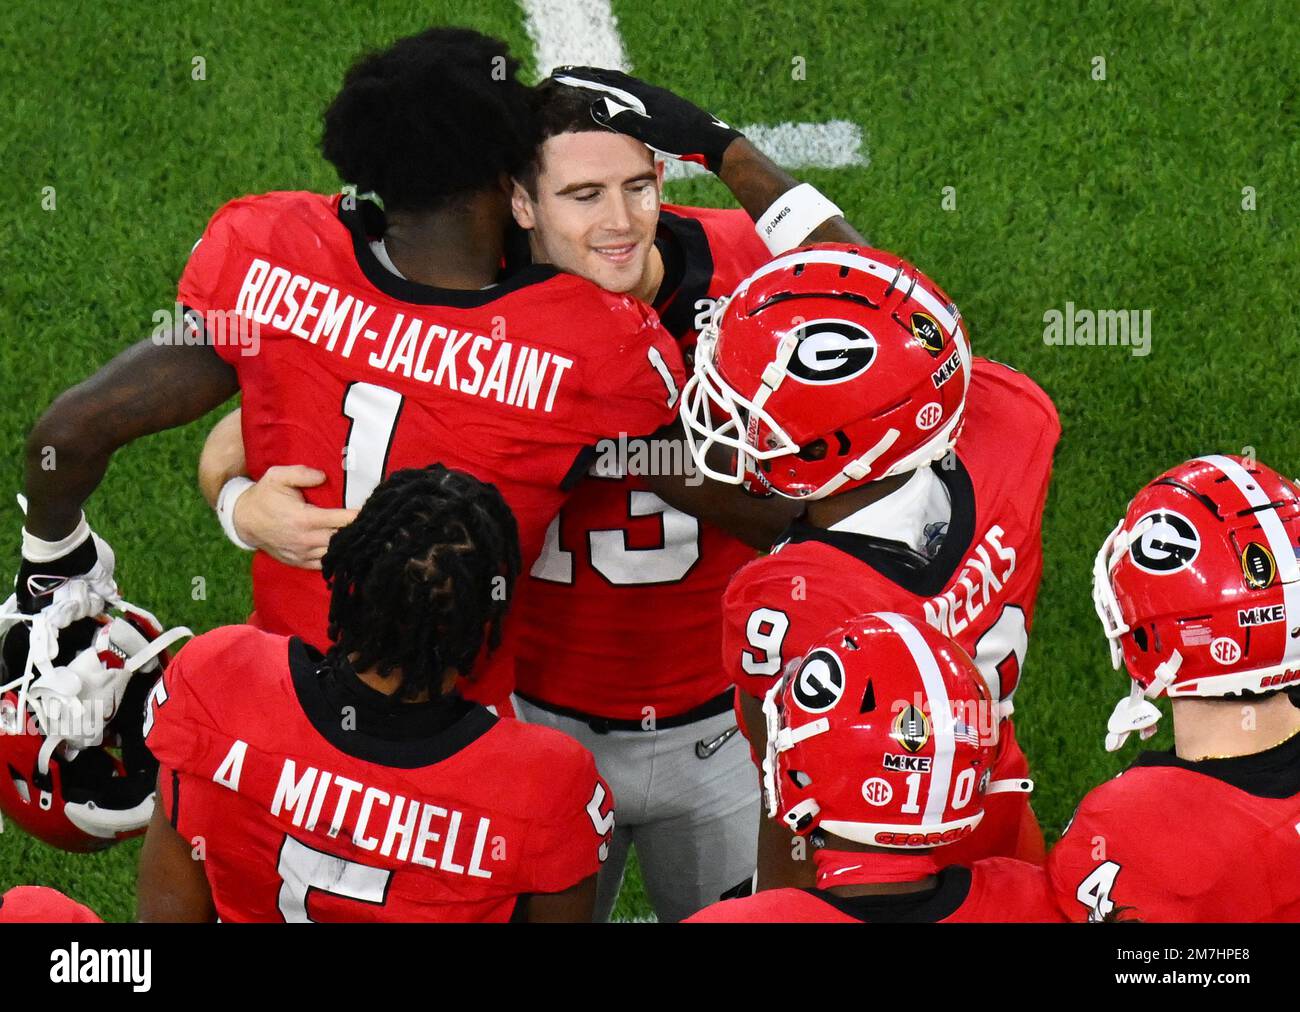 Inglewood, United States. 09th Jan, 2023. Georgia quarterback Stetson Bennett is congratulated by teammates in the 2023 NCAA College Football National Championship against TCU at SoFi Stadium in Inglewood, California, on Monday, January 9, 2023. The Bulldogs defeated the TCU Horned Frogs 65-7. Photo by Jon SooHoo/UPI Credit: UPI/Alamy Live News Stock Photo